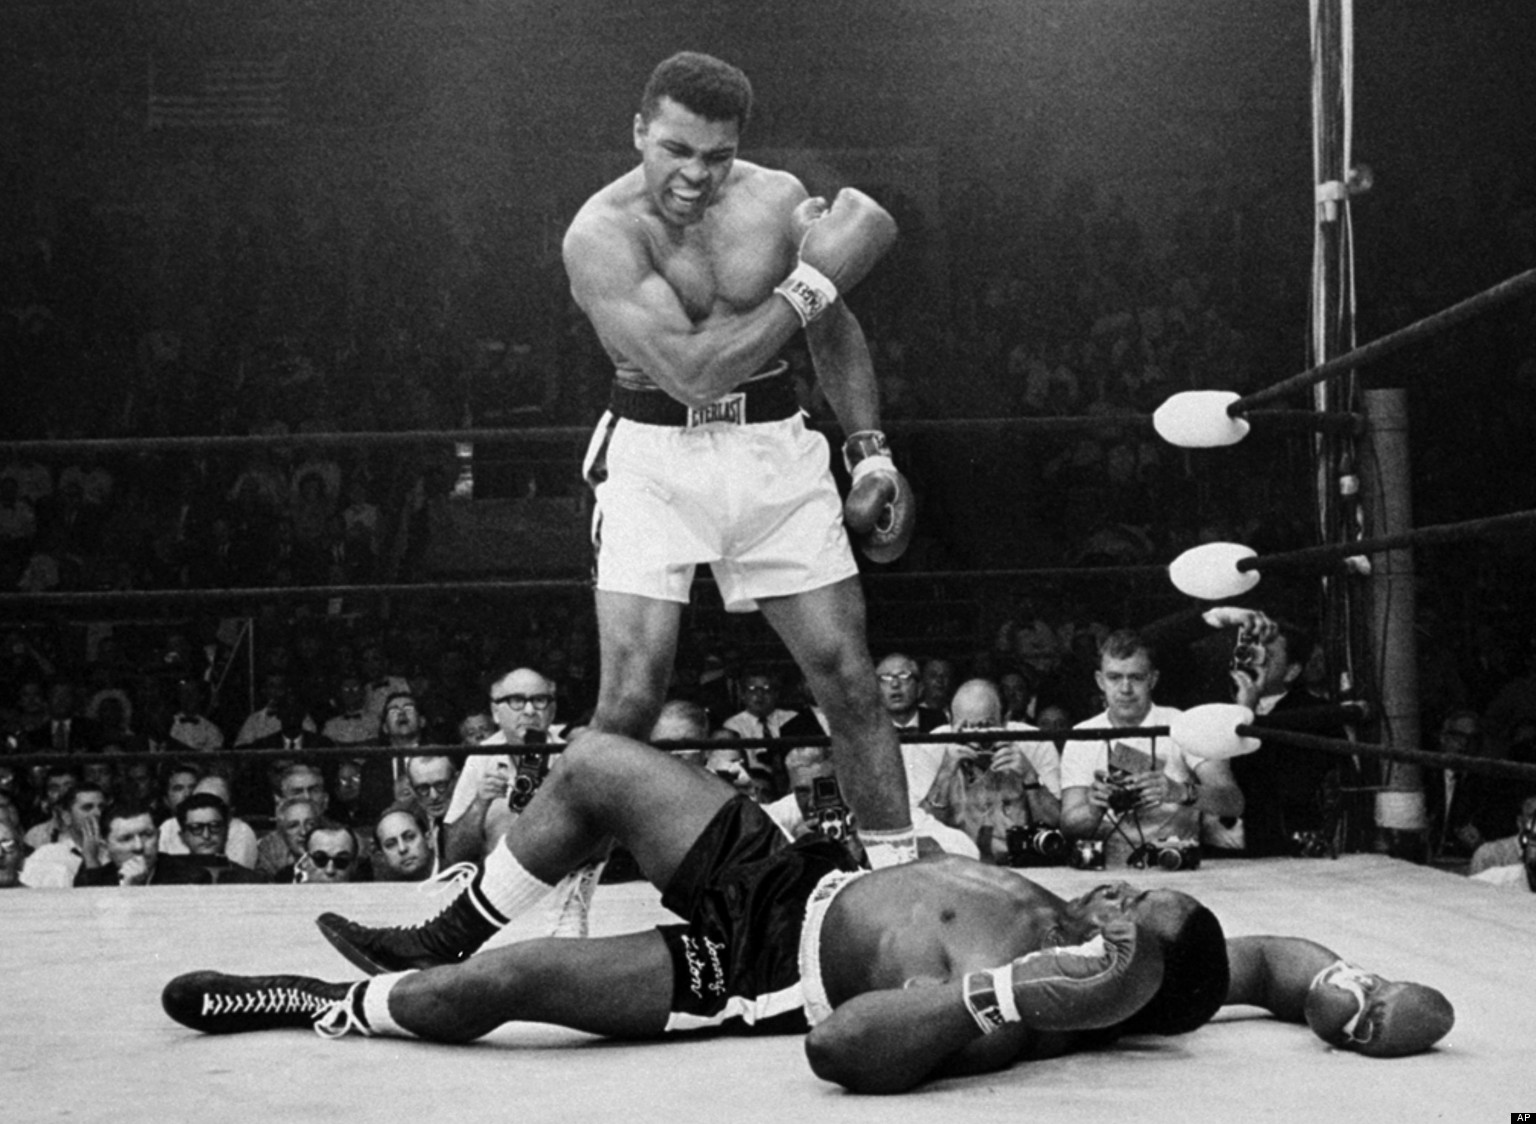 FILE - In this May 25, 1965, file photo, heavyweight champion Muhammad Ali stands over fallen challenger Sonny Liston, after dropping Liston with a short hard right to the jaw in Lewiston, Maine. Ali turns 70 on Jan. 17, 2012.(AP Photo/John Rooney, File)